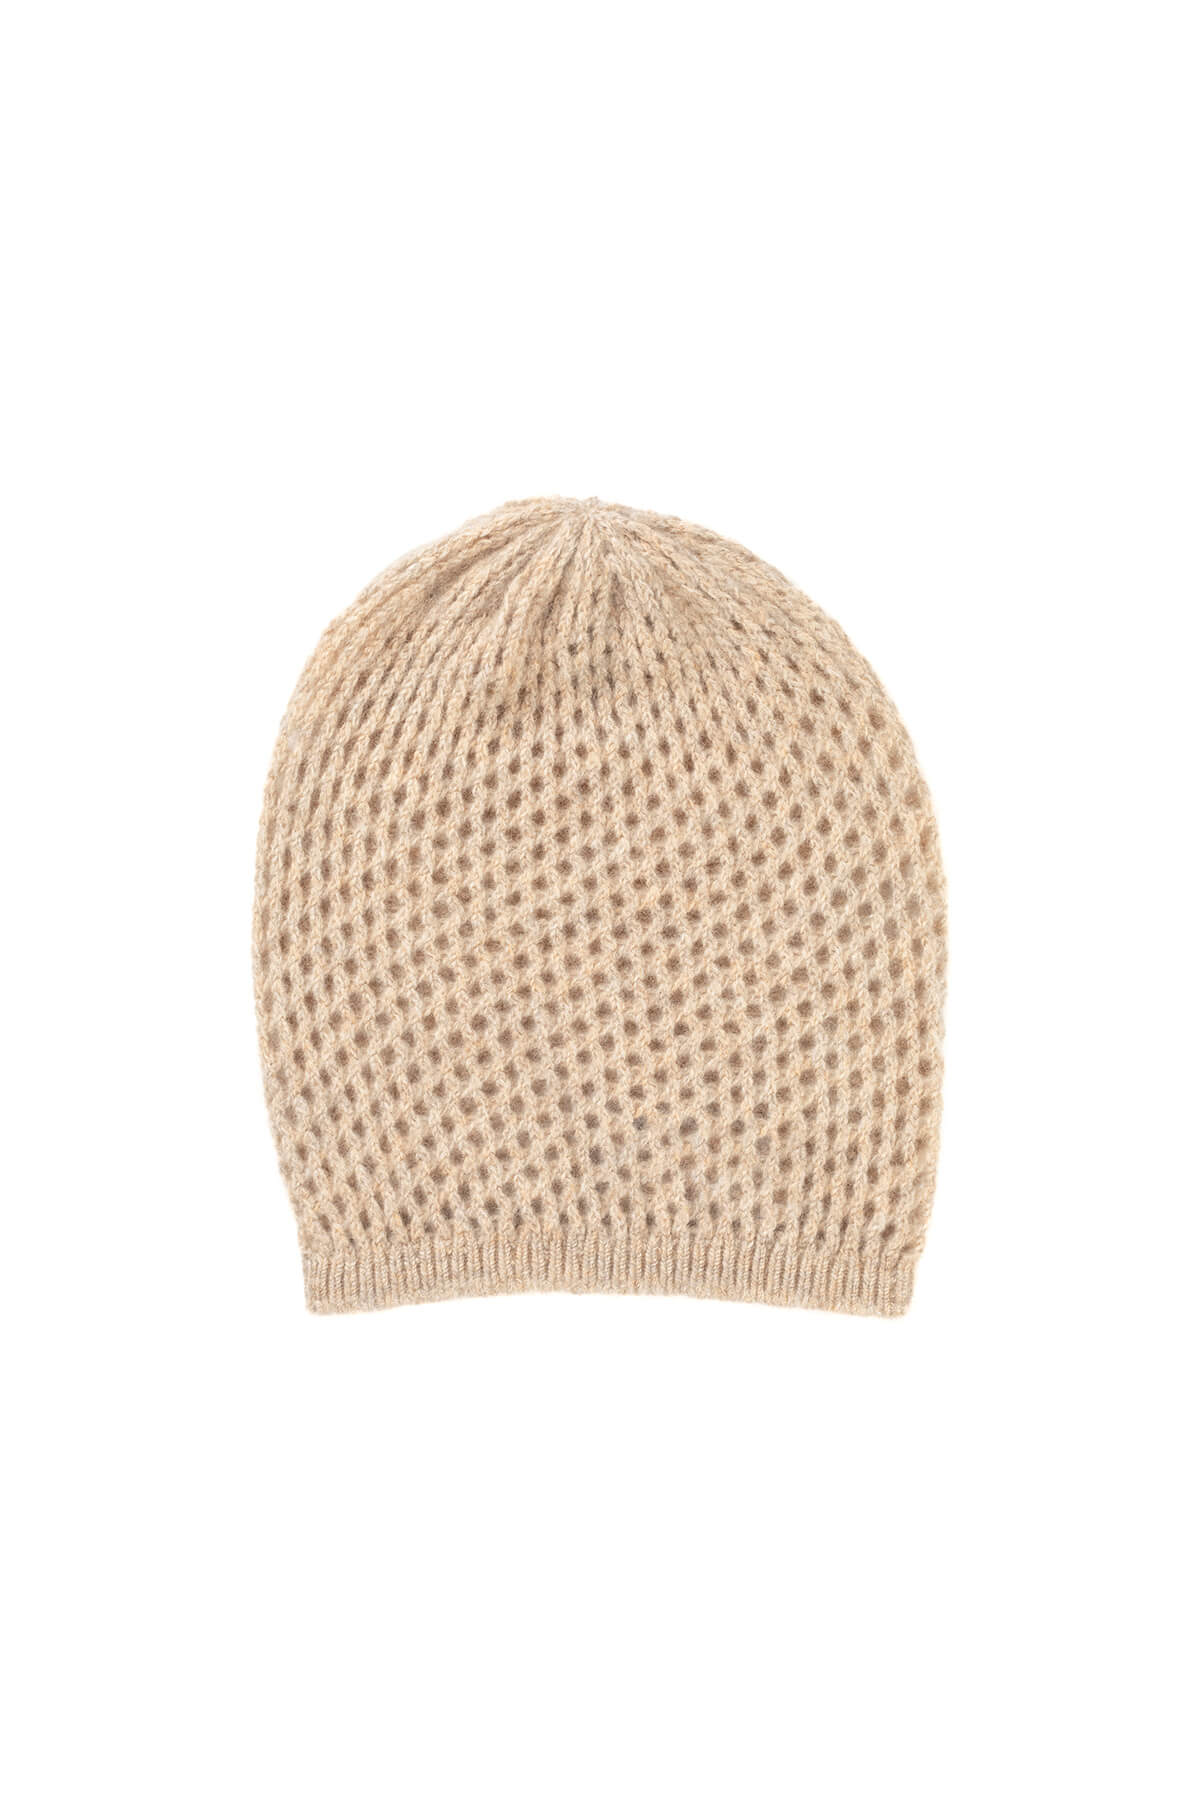 Johnstons of Elgin’s Oatmeal Cashmere Crochet Beanie on a white background HAY03301HB0210